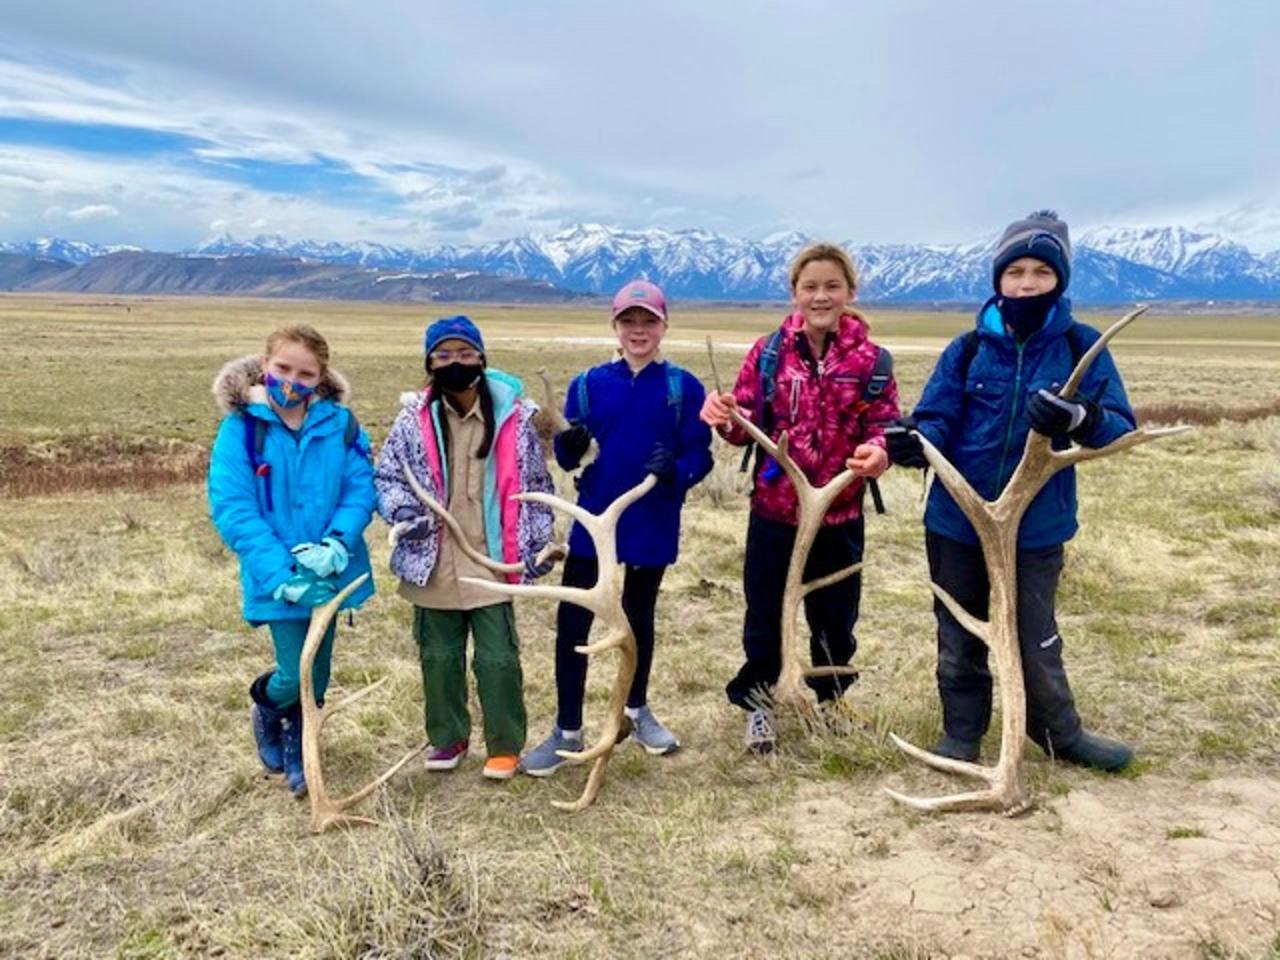 Three cheers for girls in the Equality State. Changes in the times, changes in scouting, have opened opportunities for girls, including being able to take part in the annual antler harvest on the Elk Refuge. Photo courtesy Mindy Kim-Miller